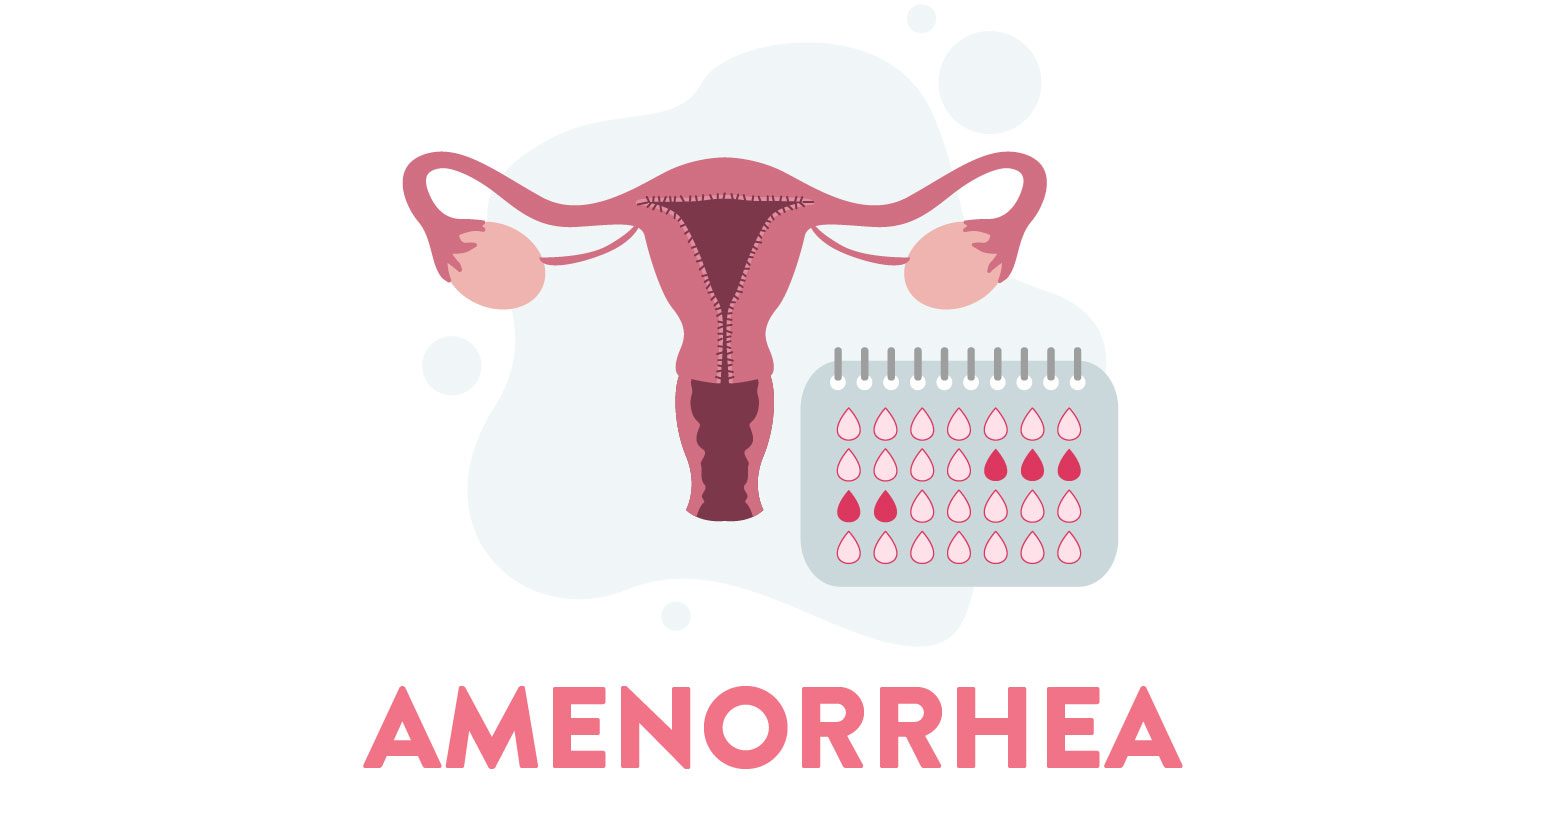 All About Amenorrhea